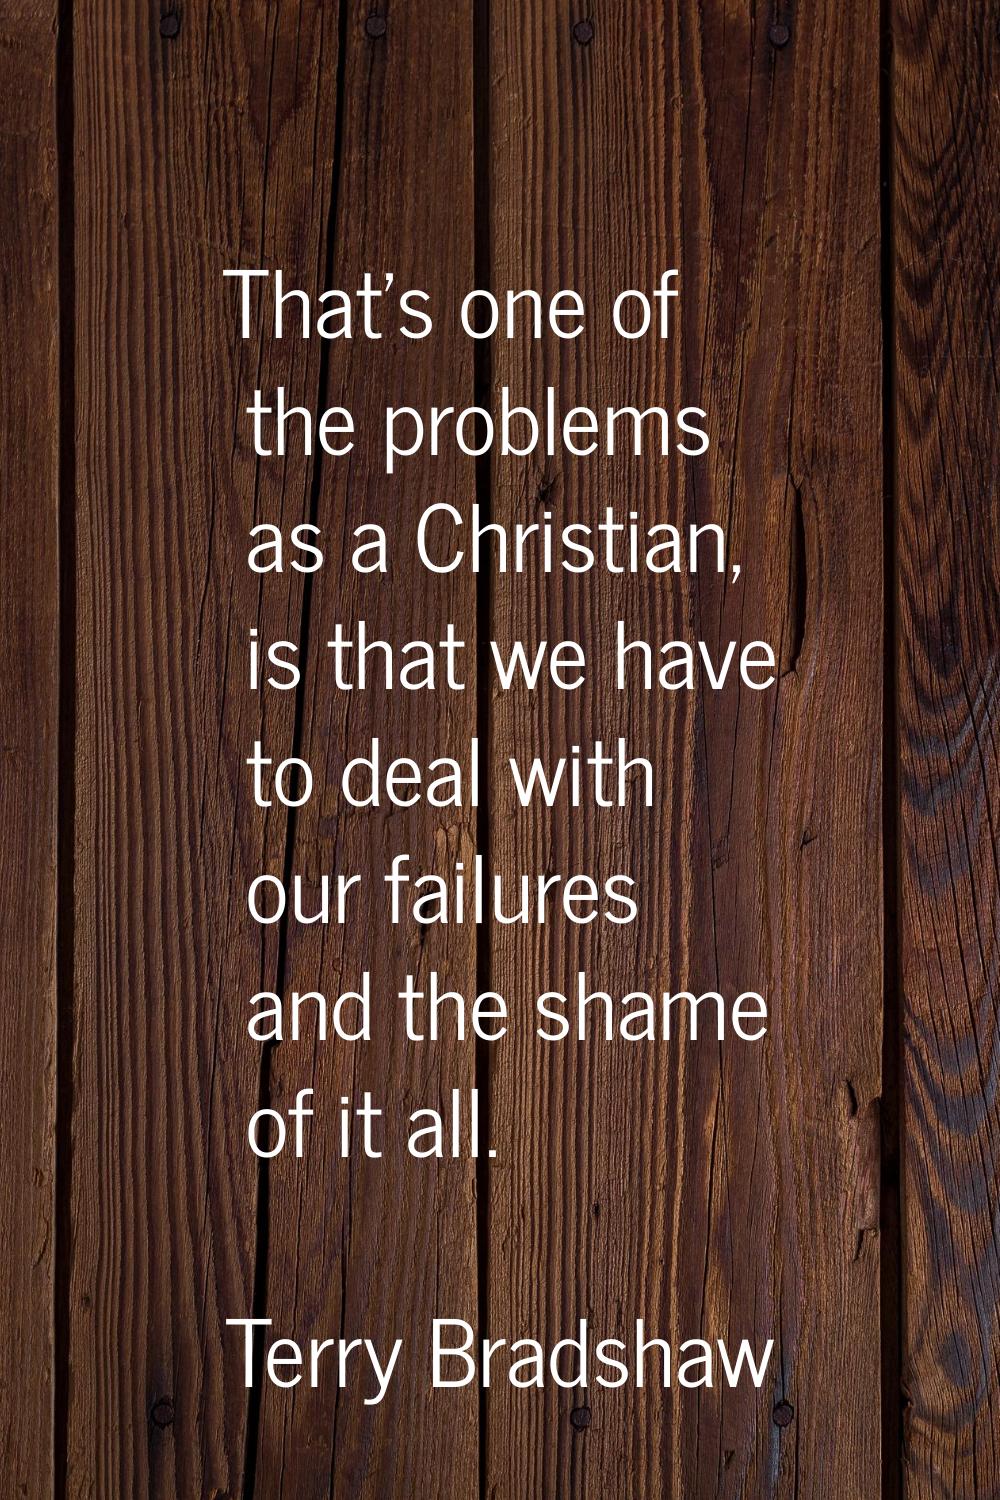 That's one of the problems as a Christian, is that we have to deal with our failures and the shame 